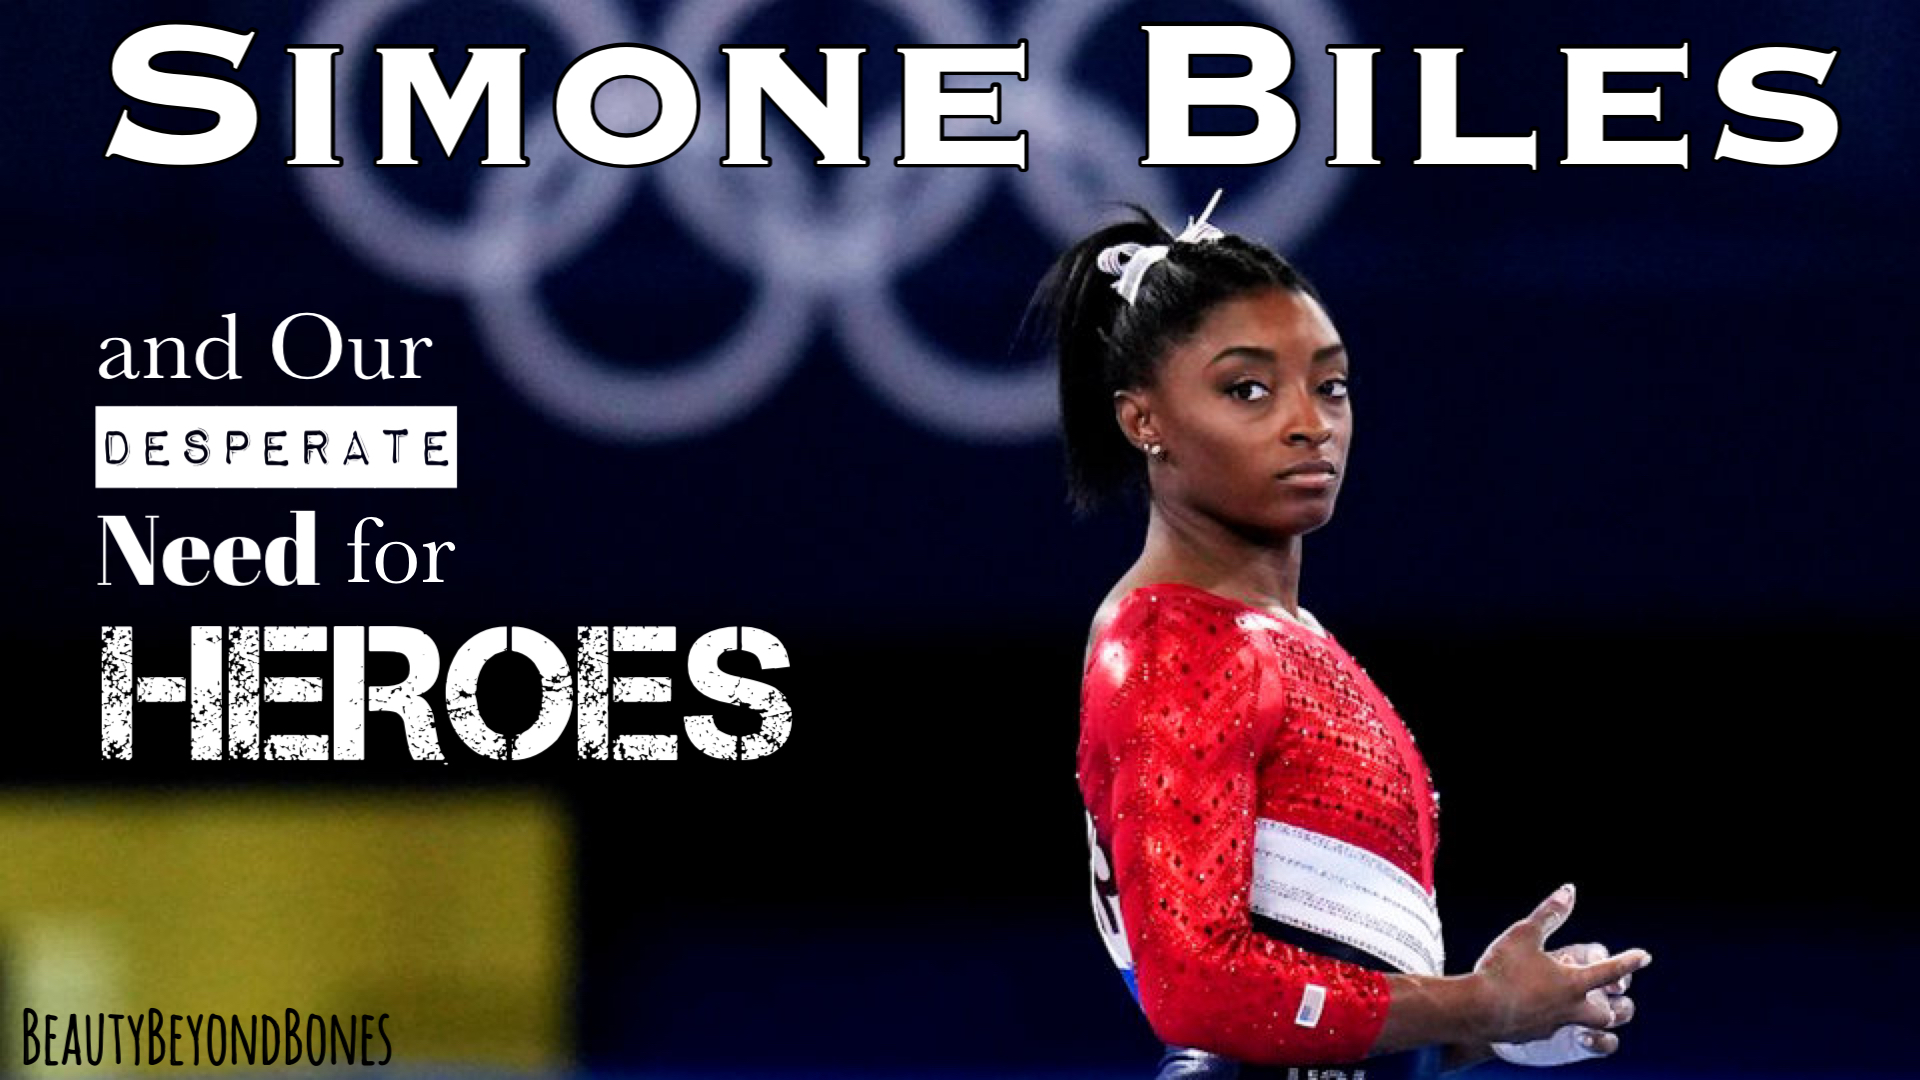 Simone Biles: Our Desperate Need for Heroes